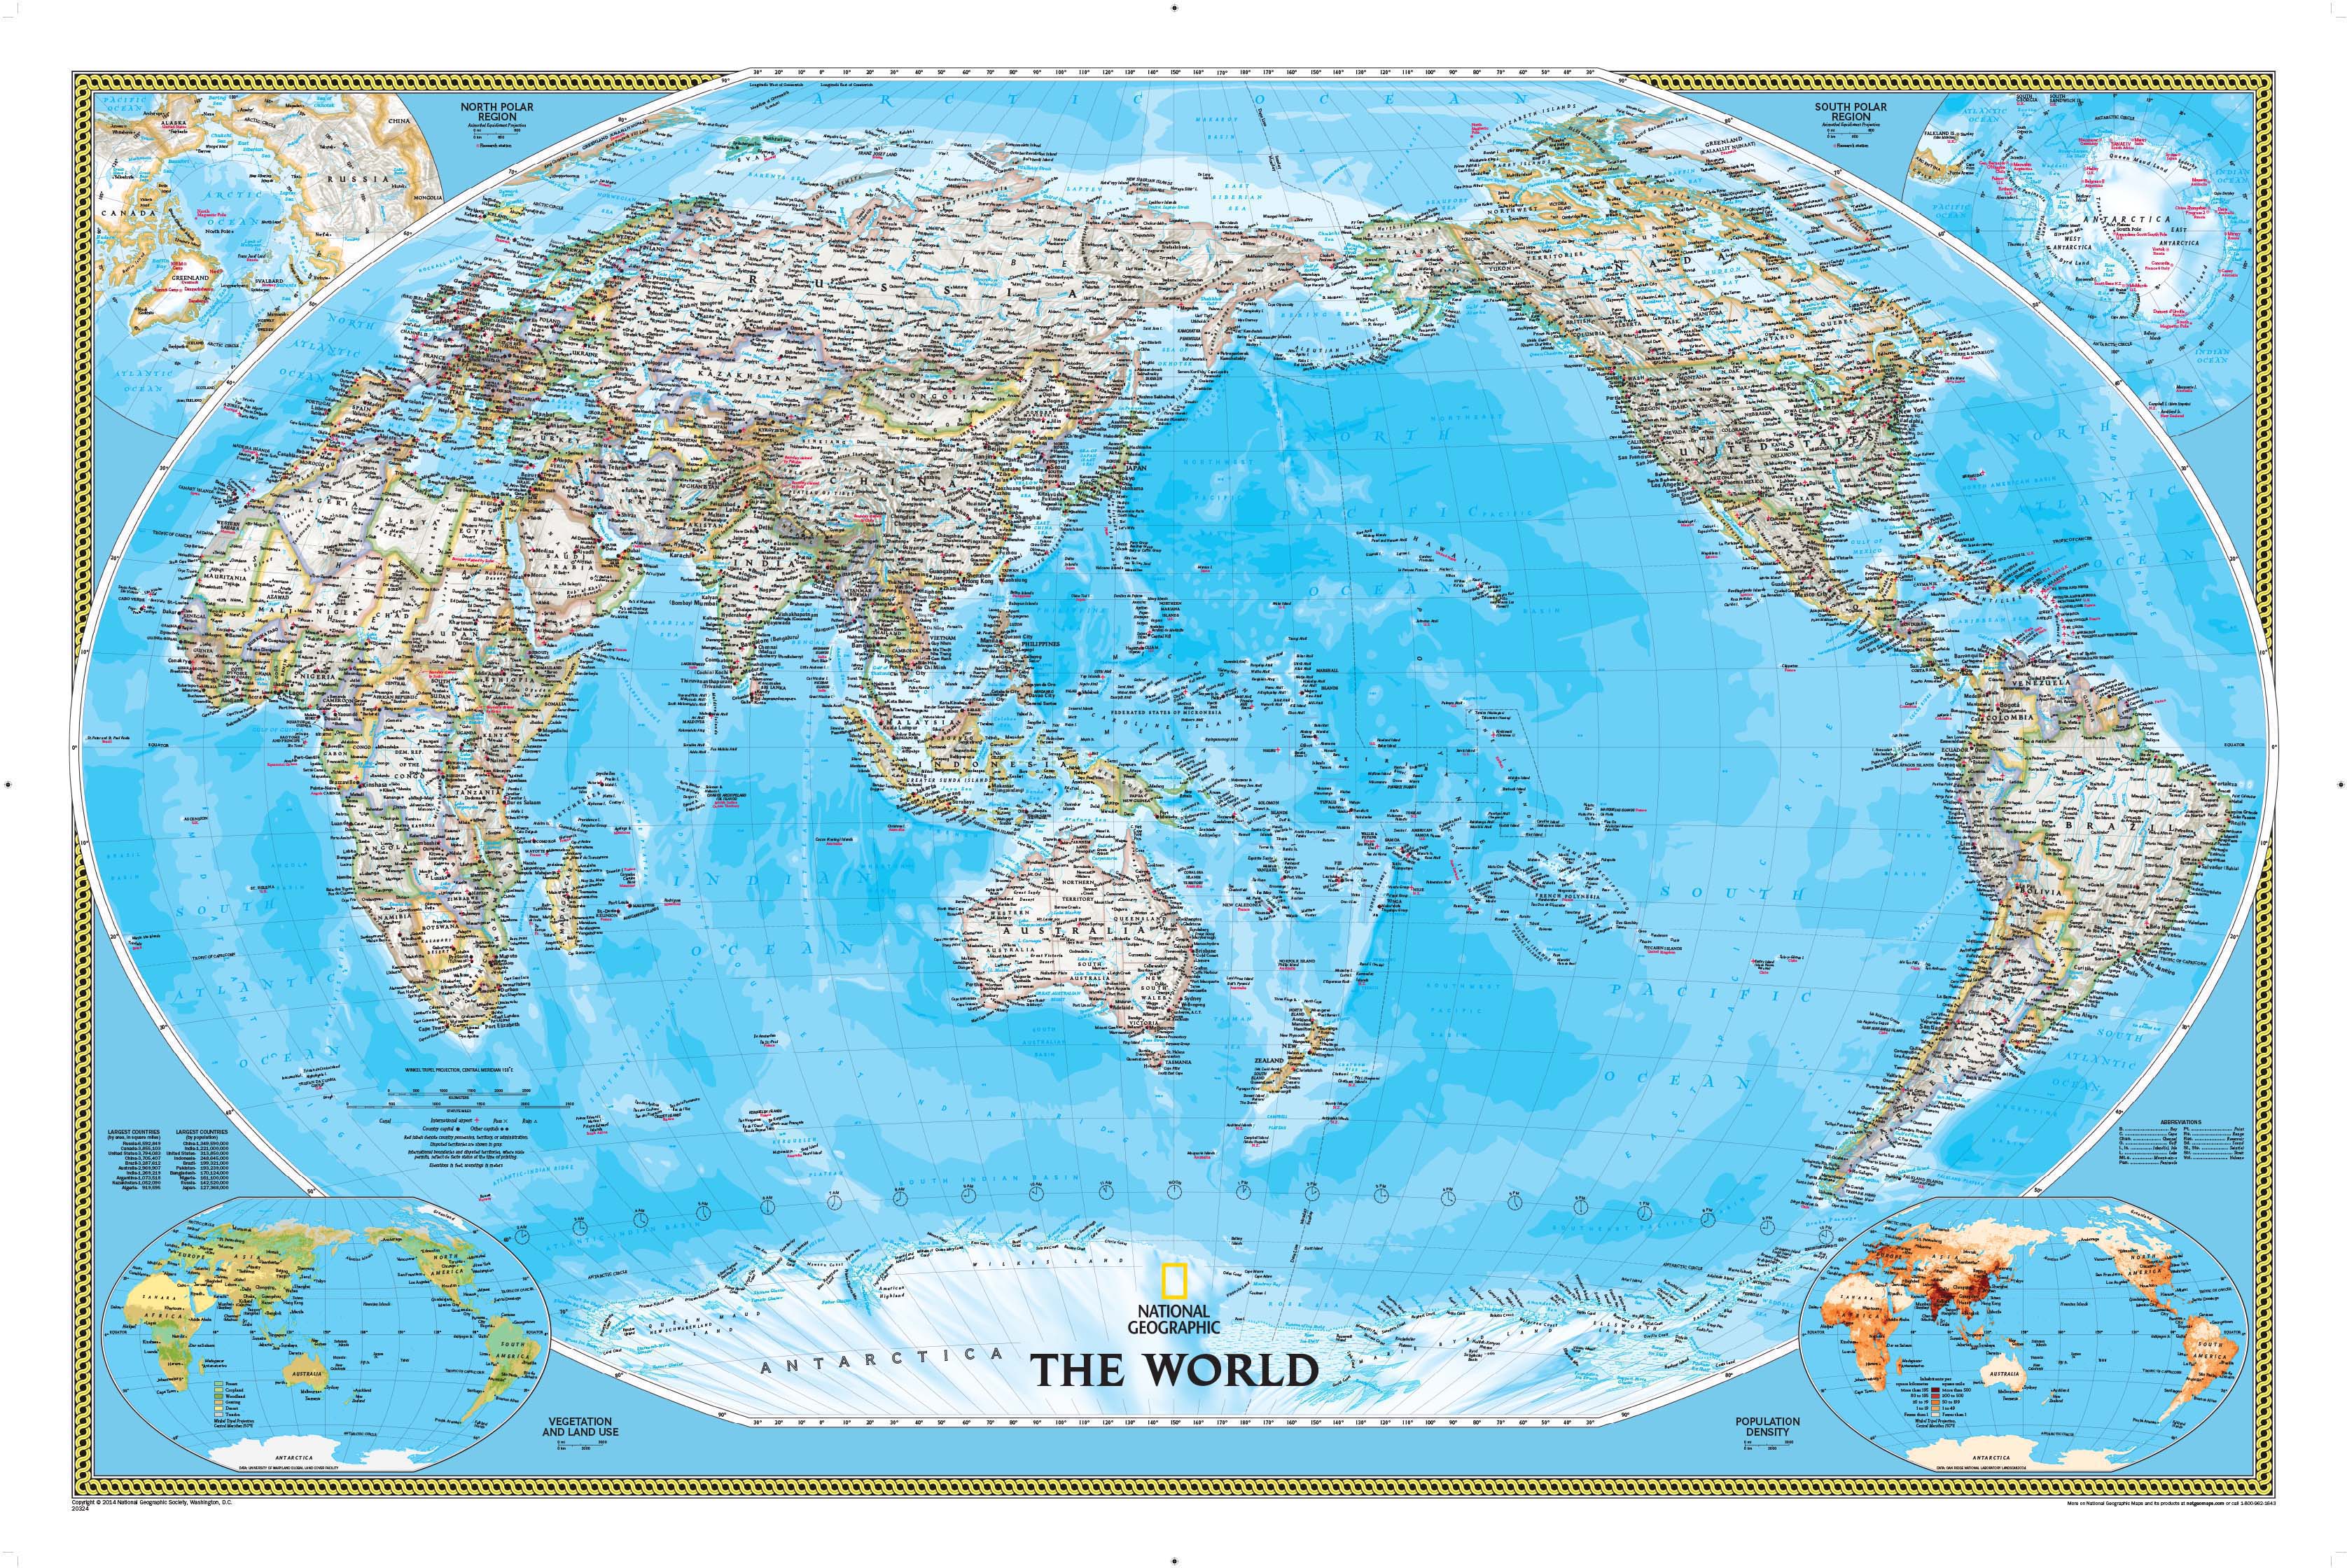 world-political-pacific-centered-wall-map-by-national-geographic-mapsales